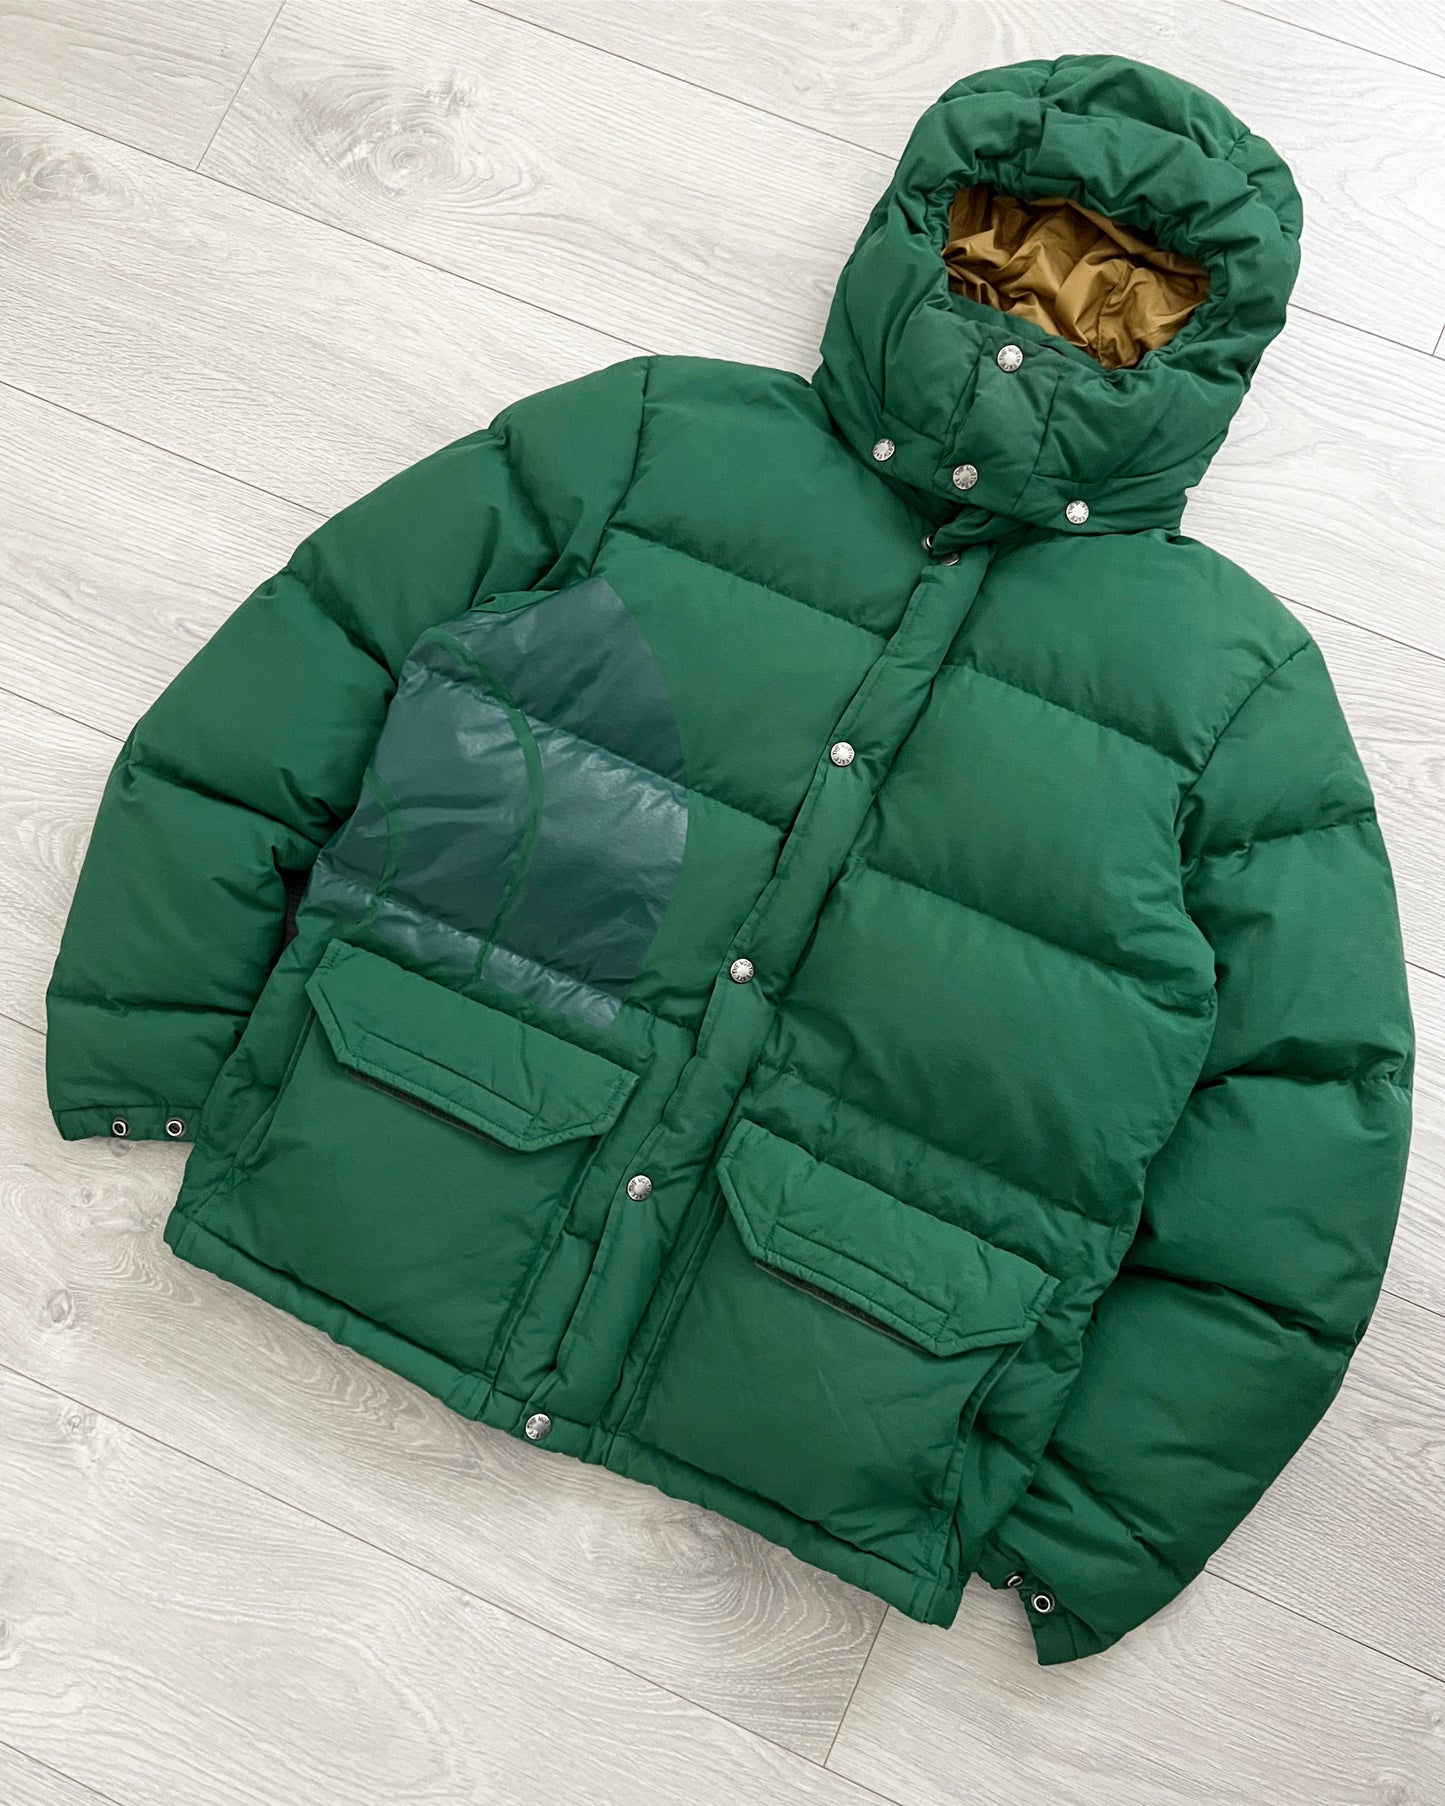 Junya Watanabe x The North Face AW2017 Down Puffer Jacket - Size S